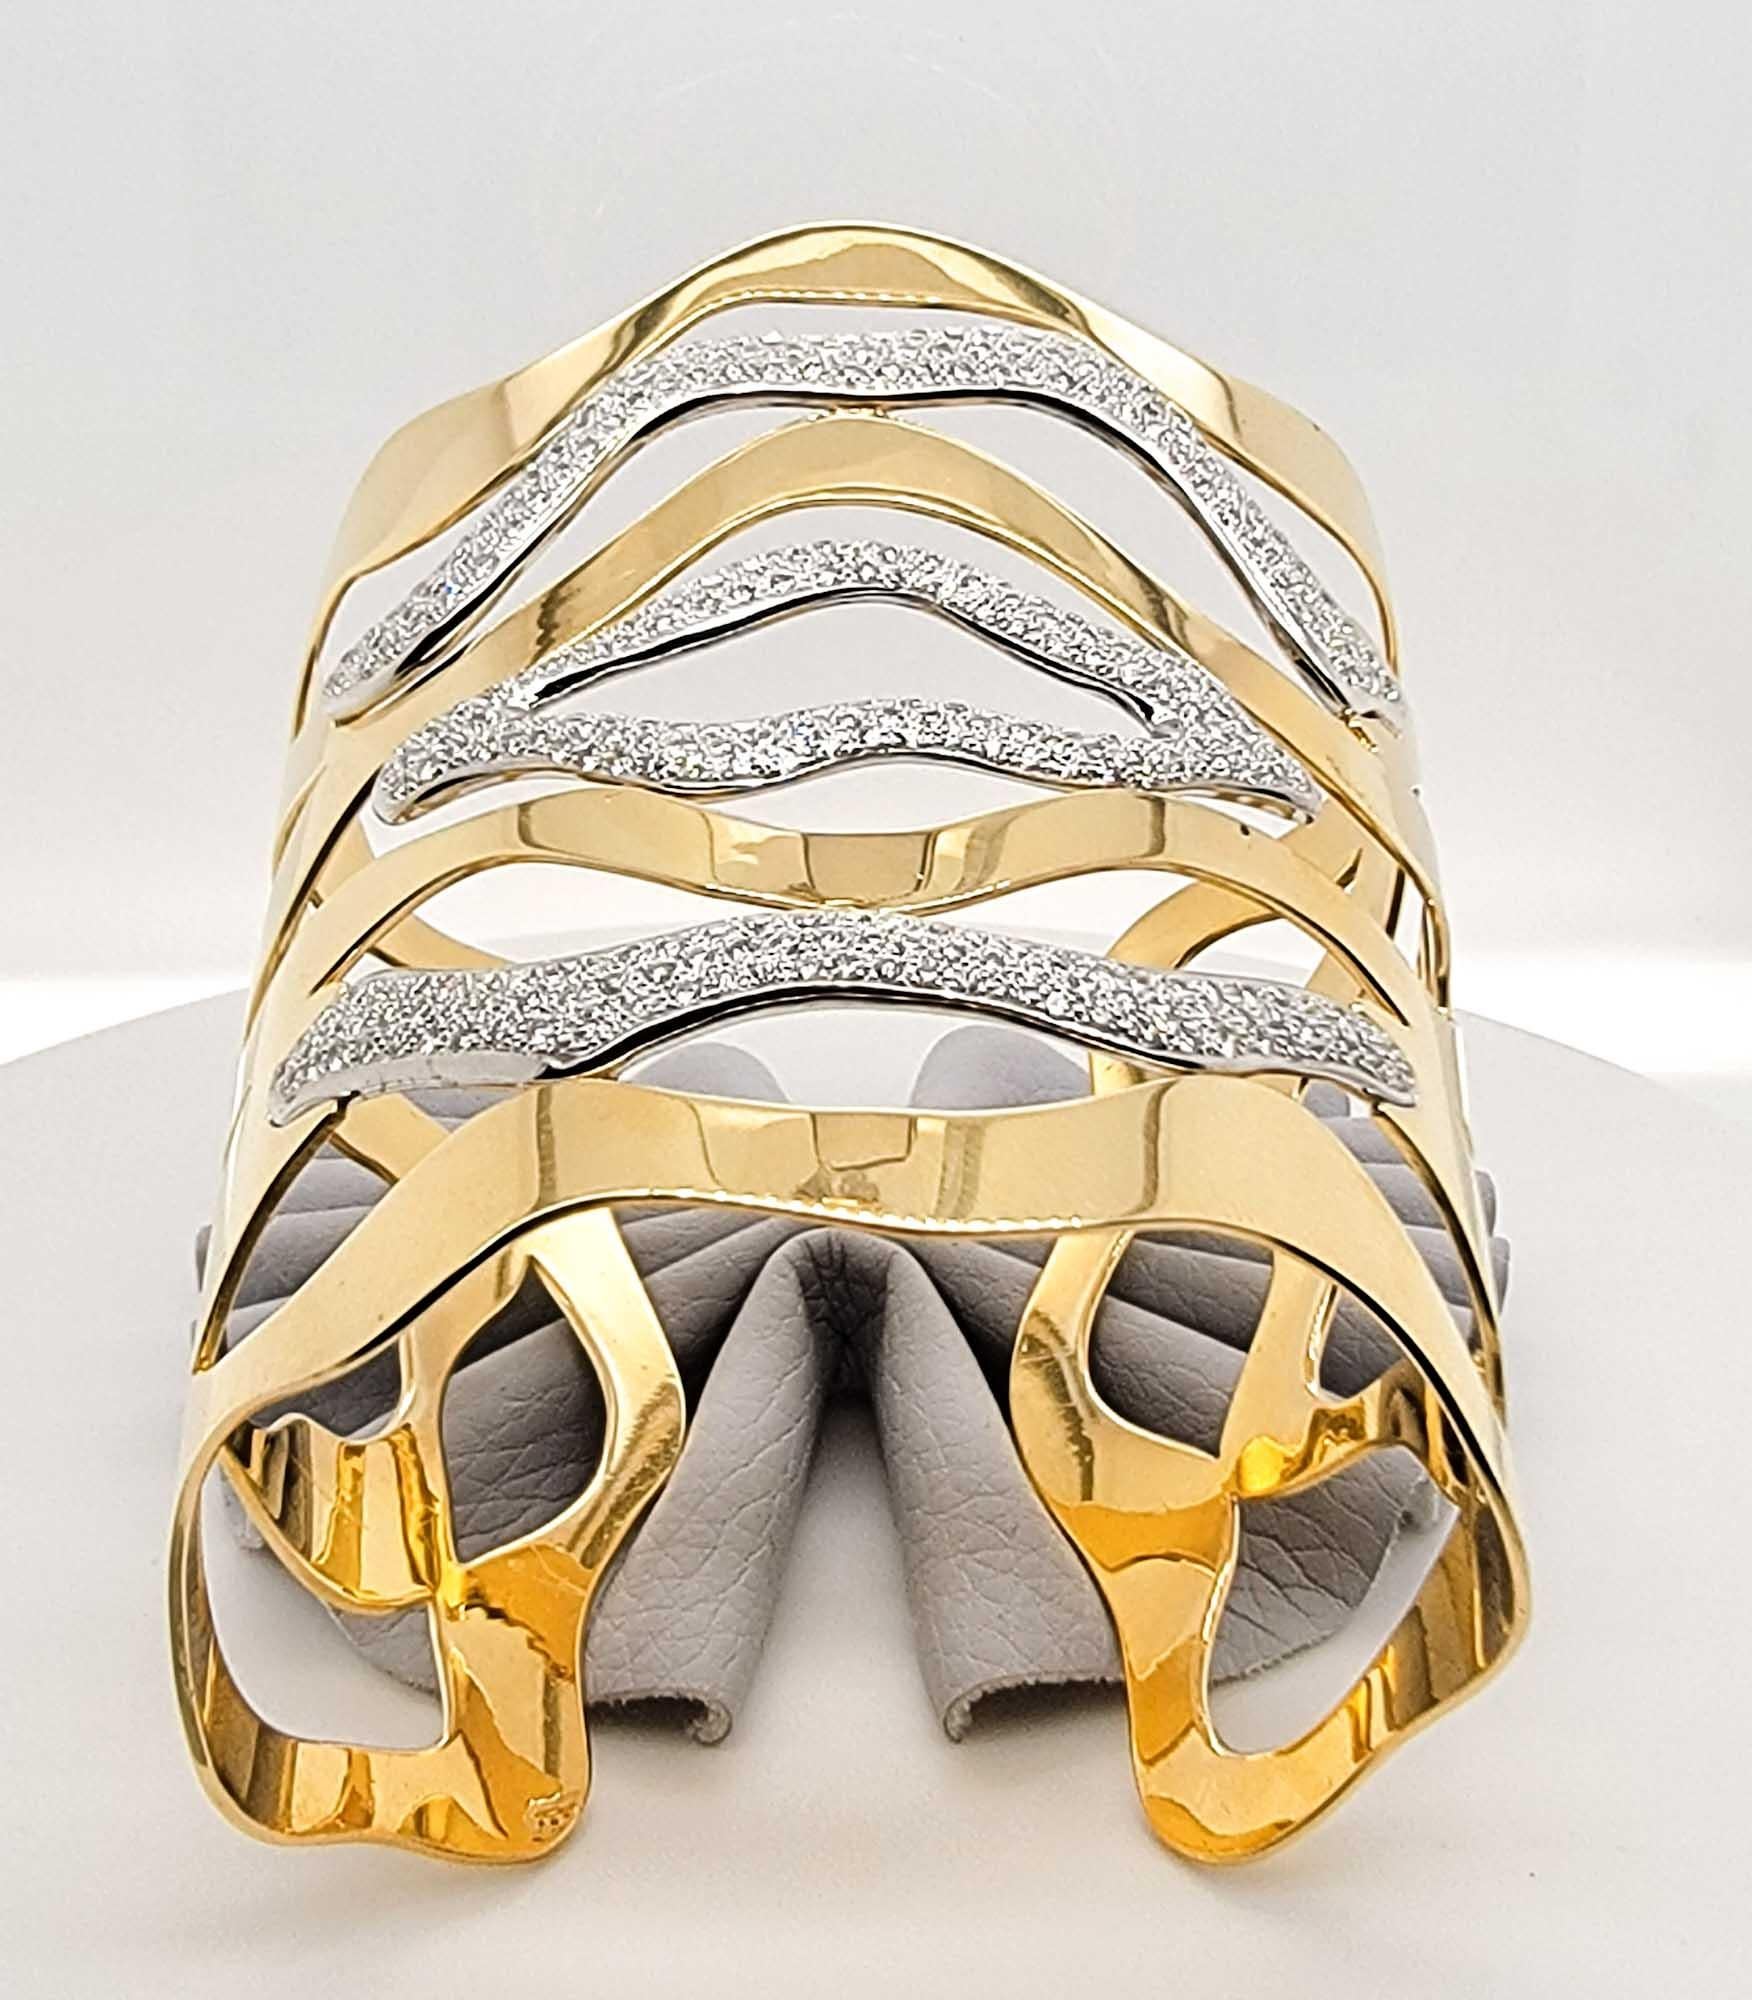 This beautiful 18 karat yellow gold bangles has diamonds weighing a total of 3 carats.

Sophia D by Joseph Dardashti LTD has been known worldwide for 35 years and are inspired by classic Art Deco design that merges with modern manufacturing